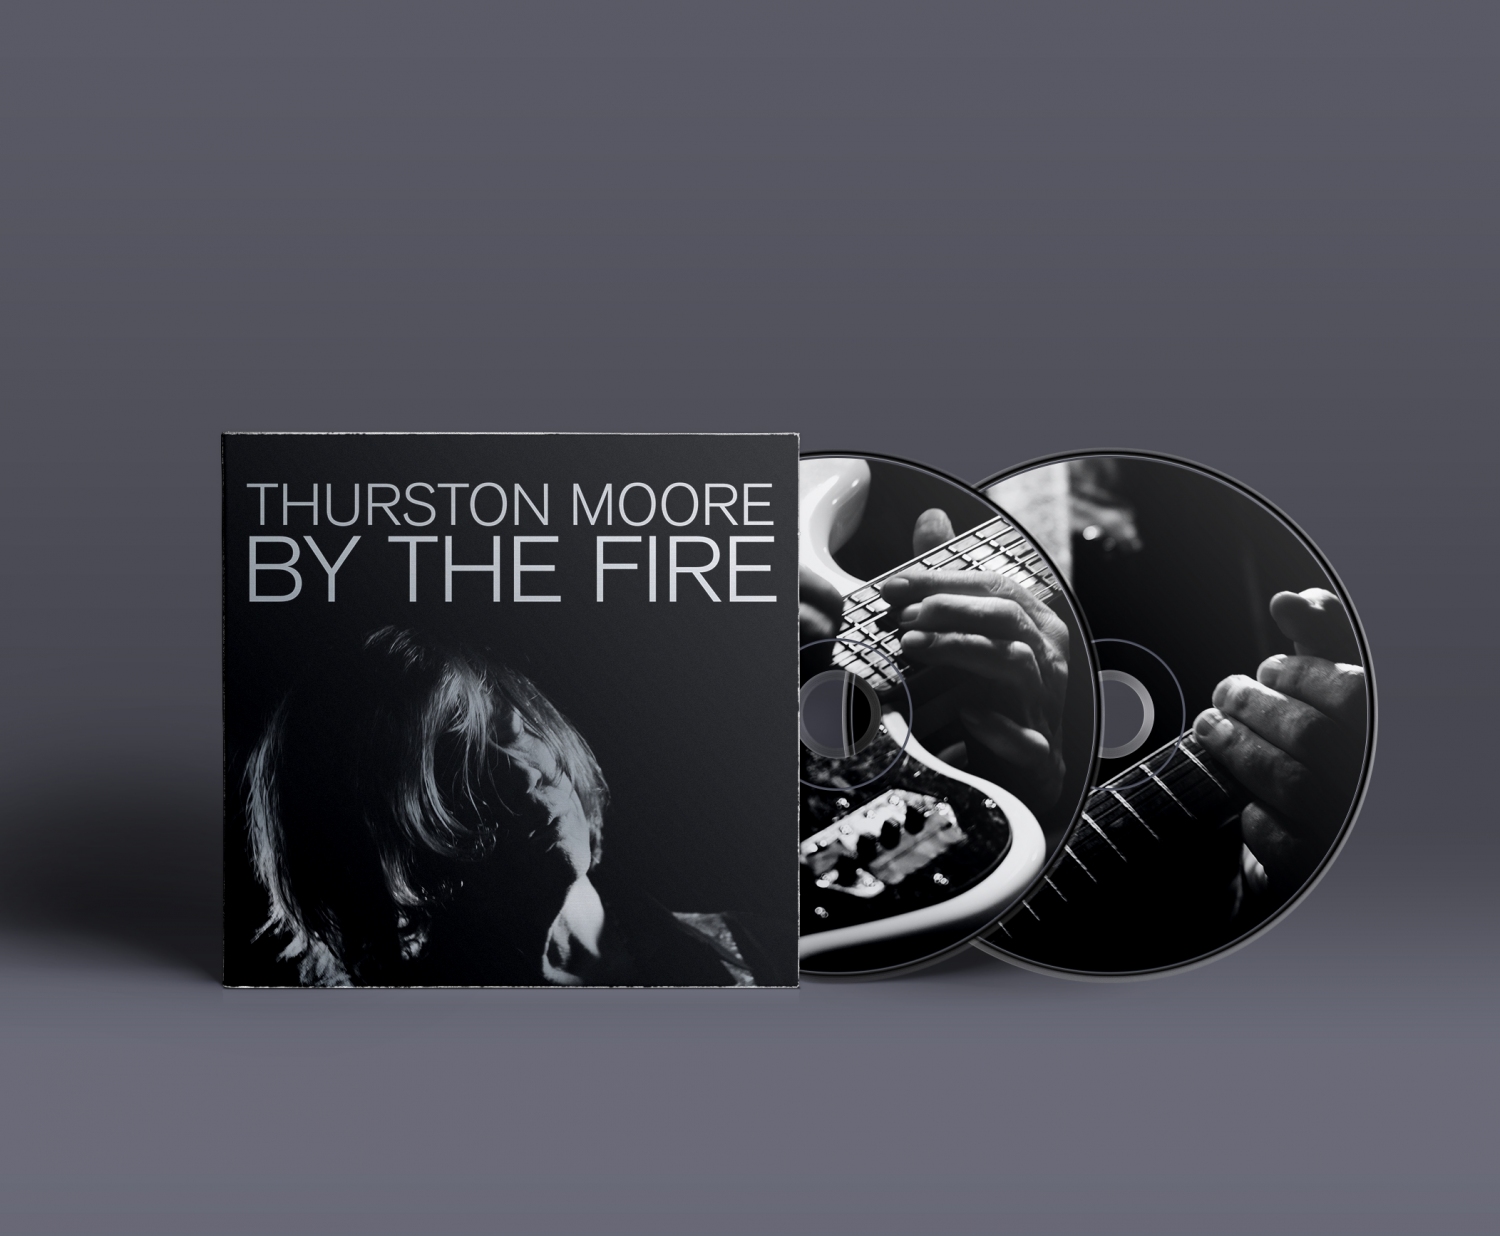 THURSTON MOORE’S LONG DAY’S JOURNEY INTO 2020